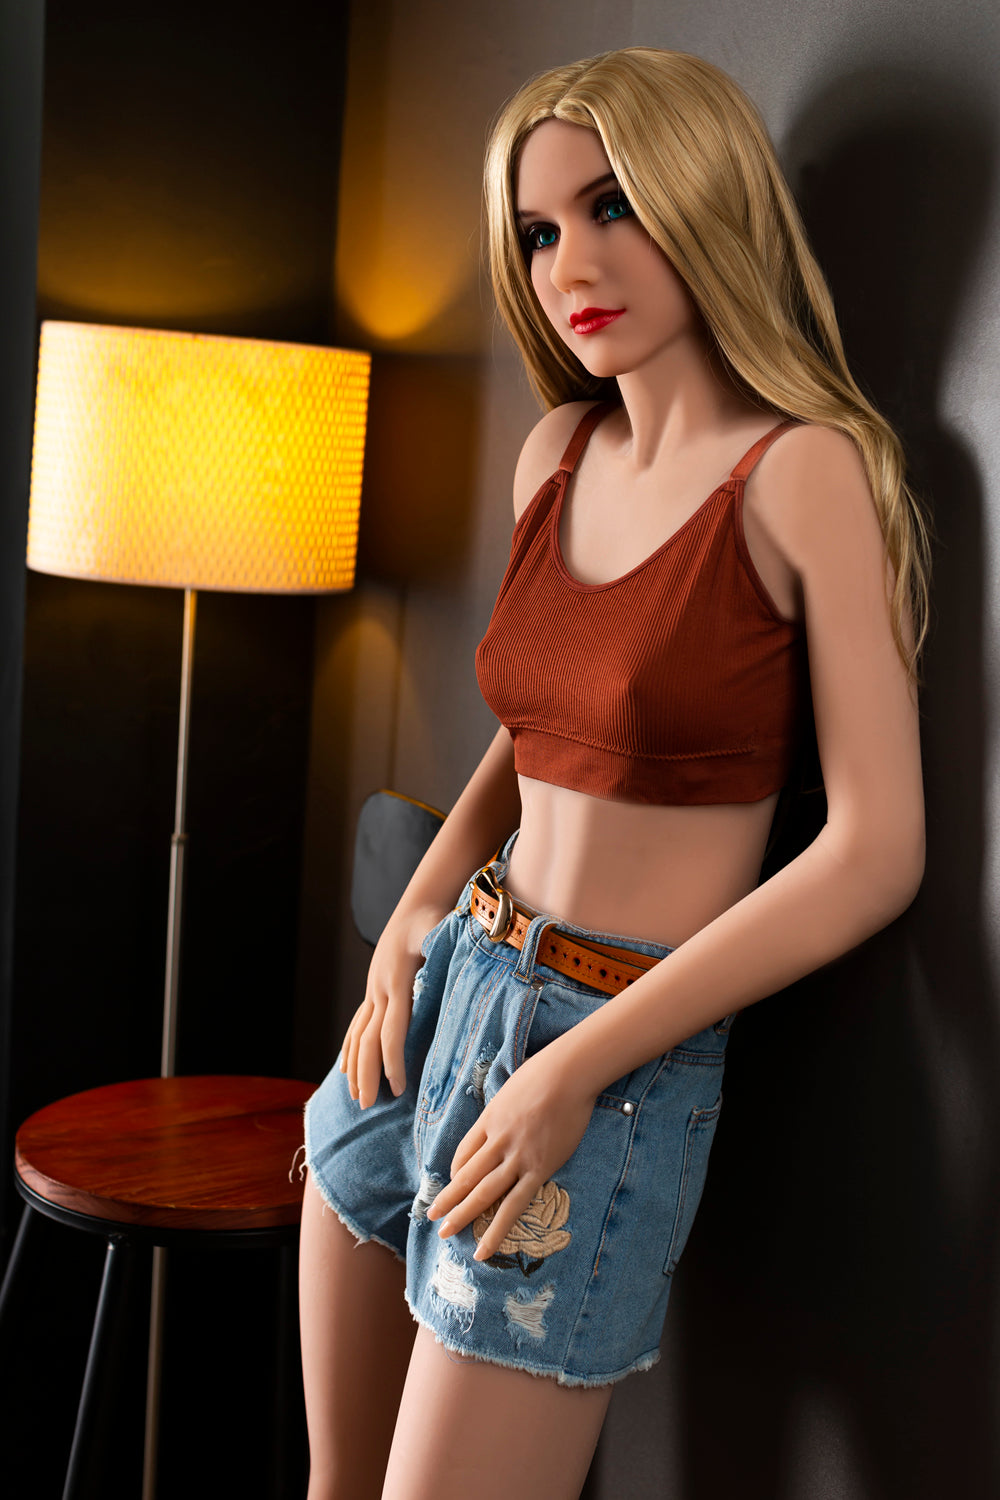 HR Doll 166 cm TPE - #16 (USA) | Buy Sex Dolls at DOLLS ACTUALLY